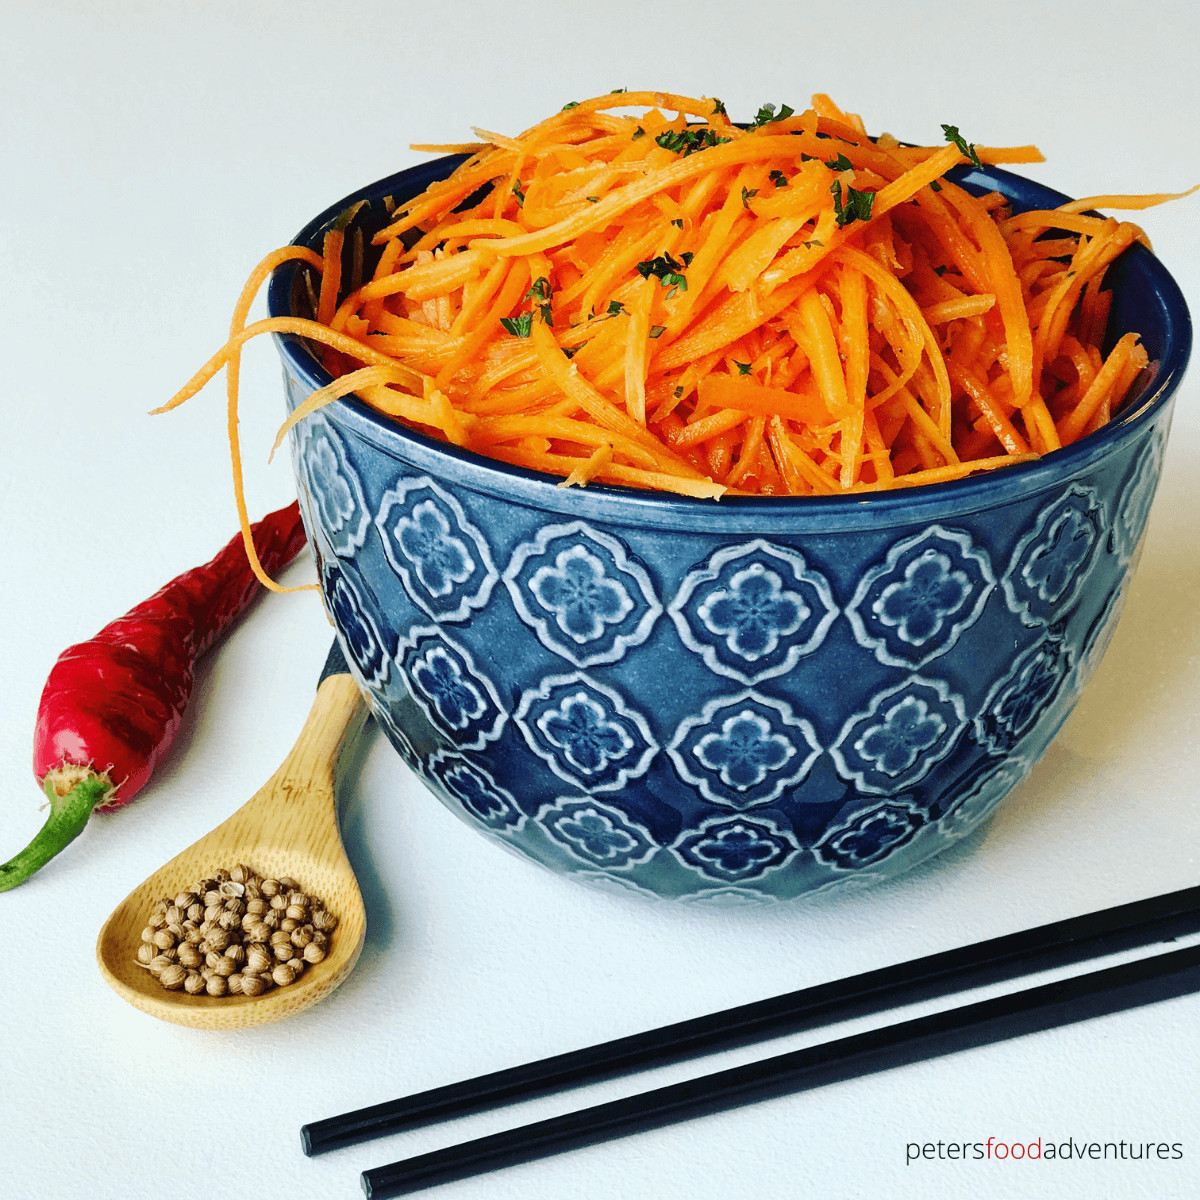 An easy Carrot Salad recipe from Russia called Morkovcha, with roots of Korean immigrants. Thinly julienned carrots with garlic, vinegar, spices and onions in hot oil. A family favorite. (Морковь по-корейски)